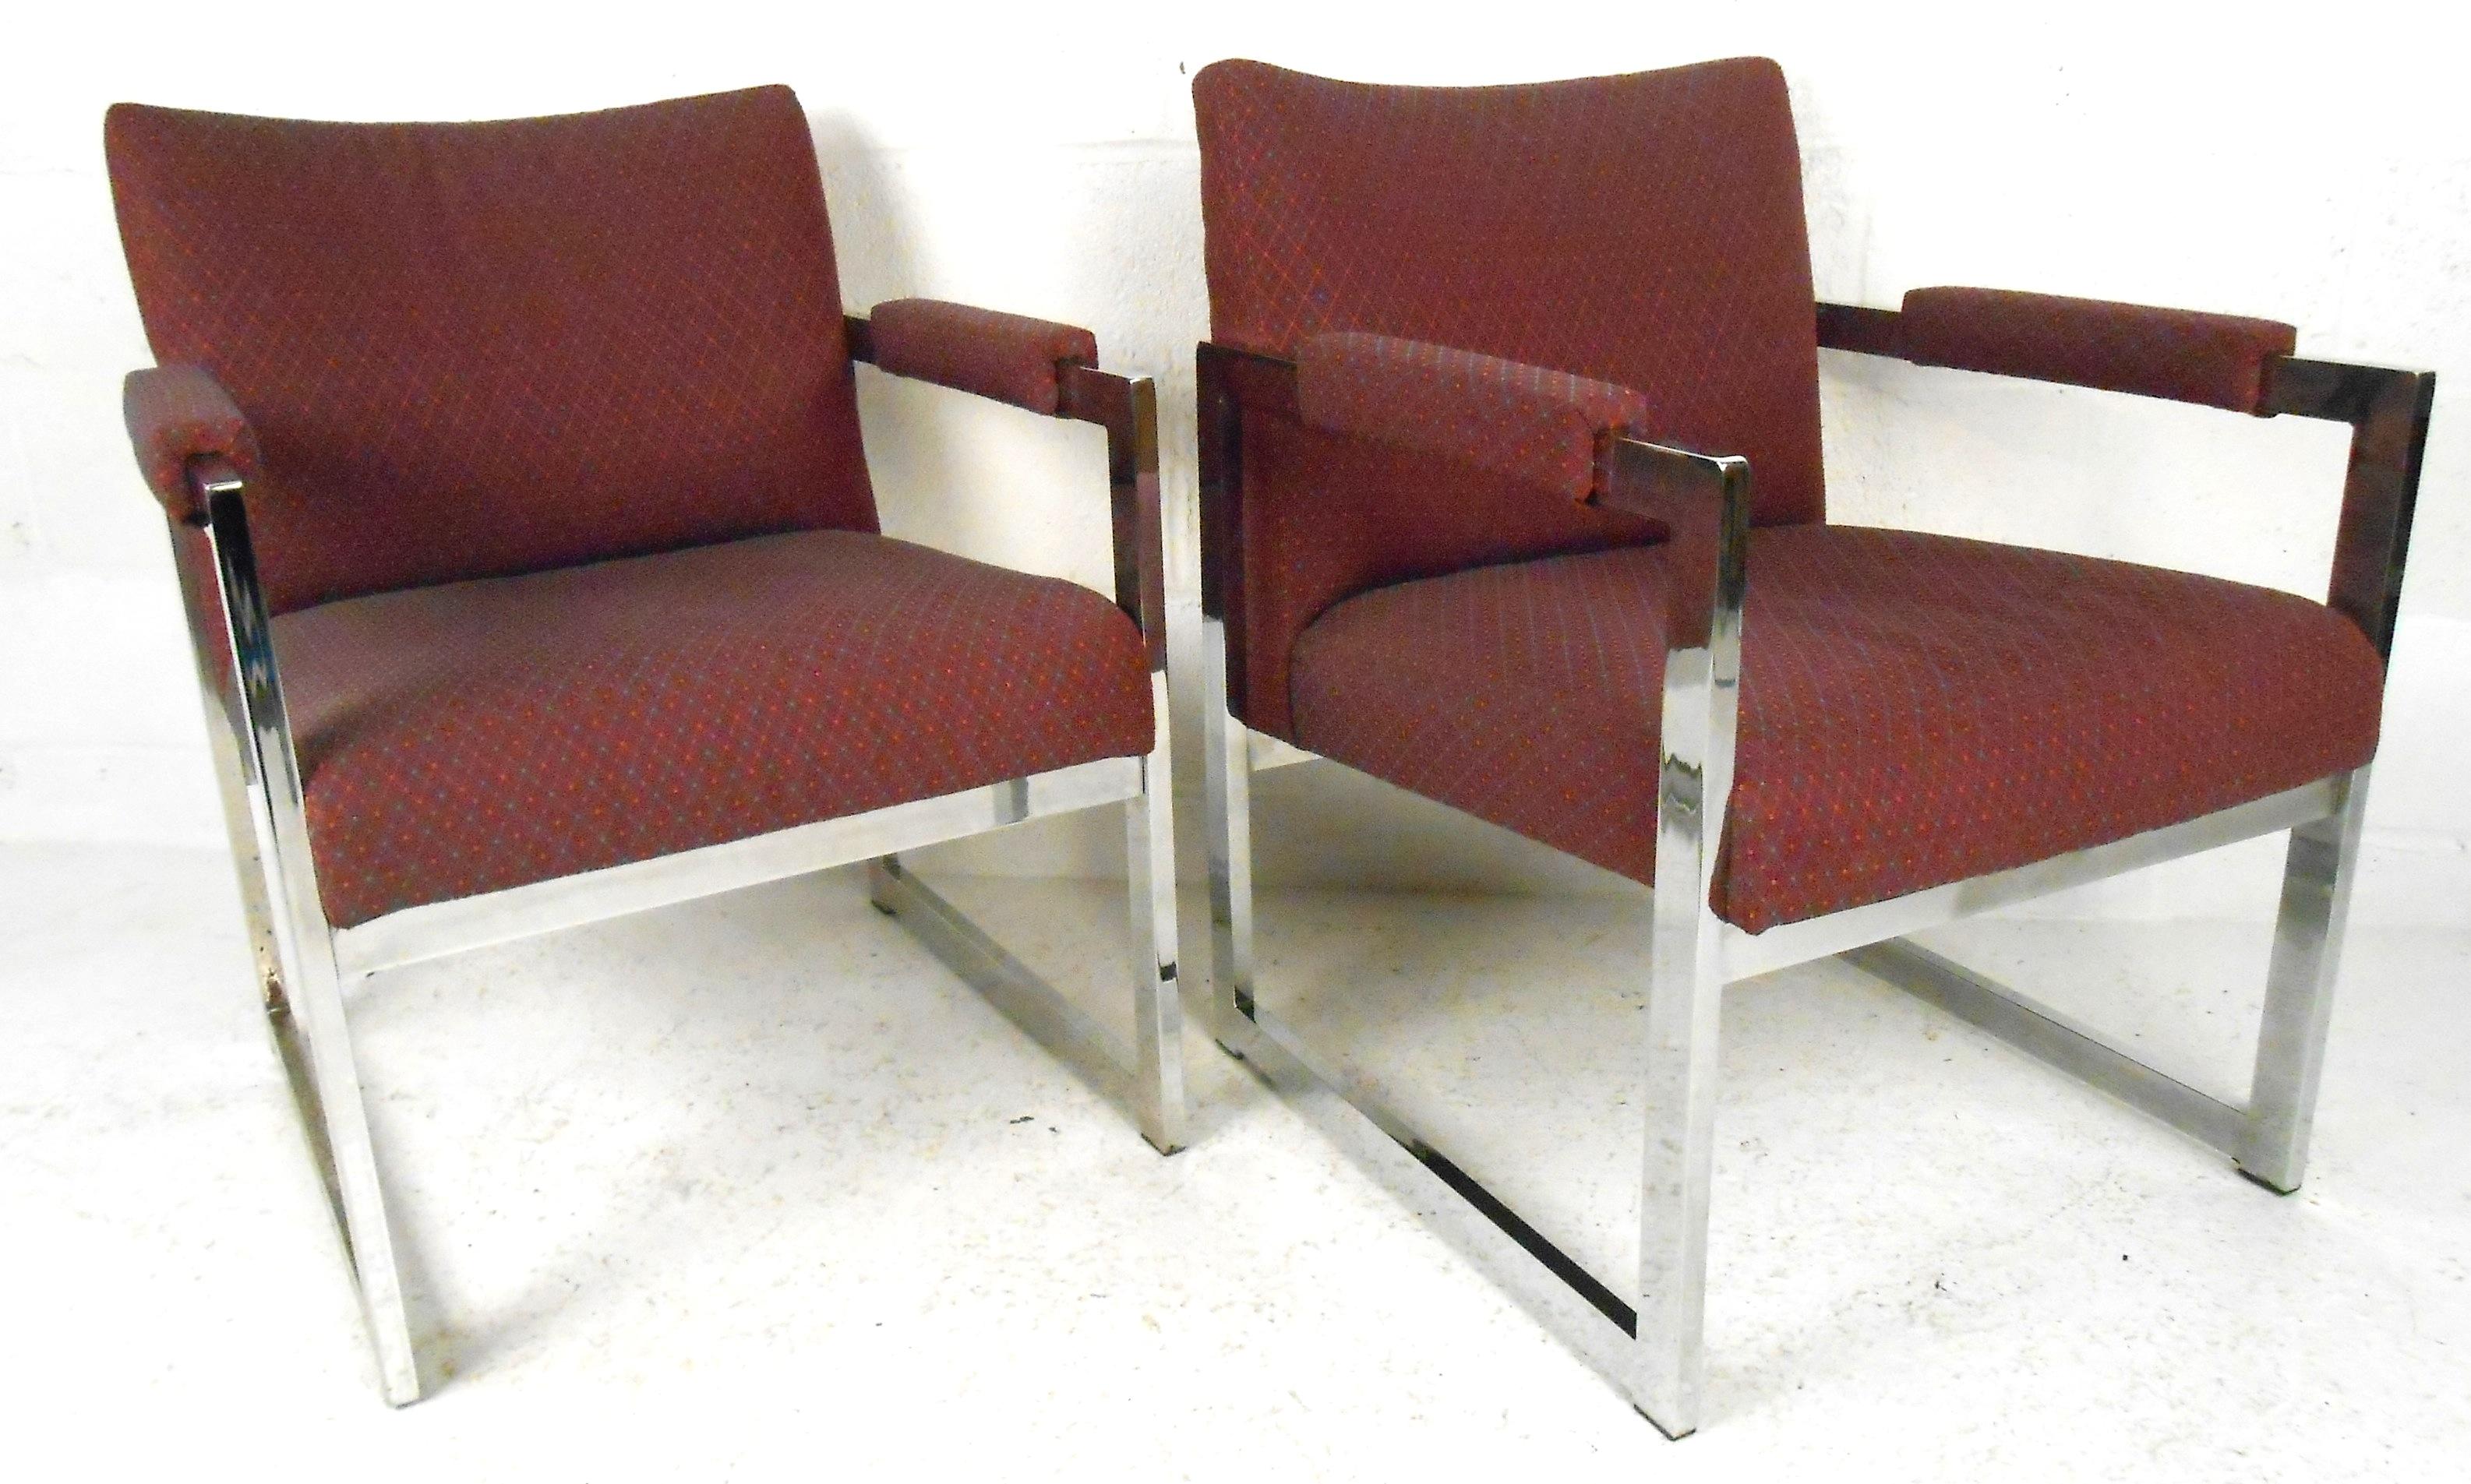 Pair of Midcentury Chrome Frame Lounge Chairs 1